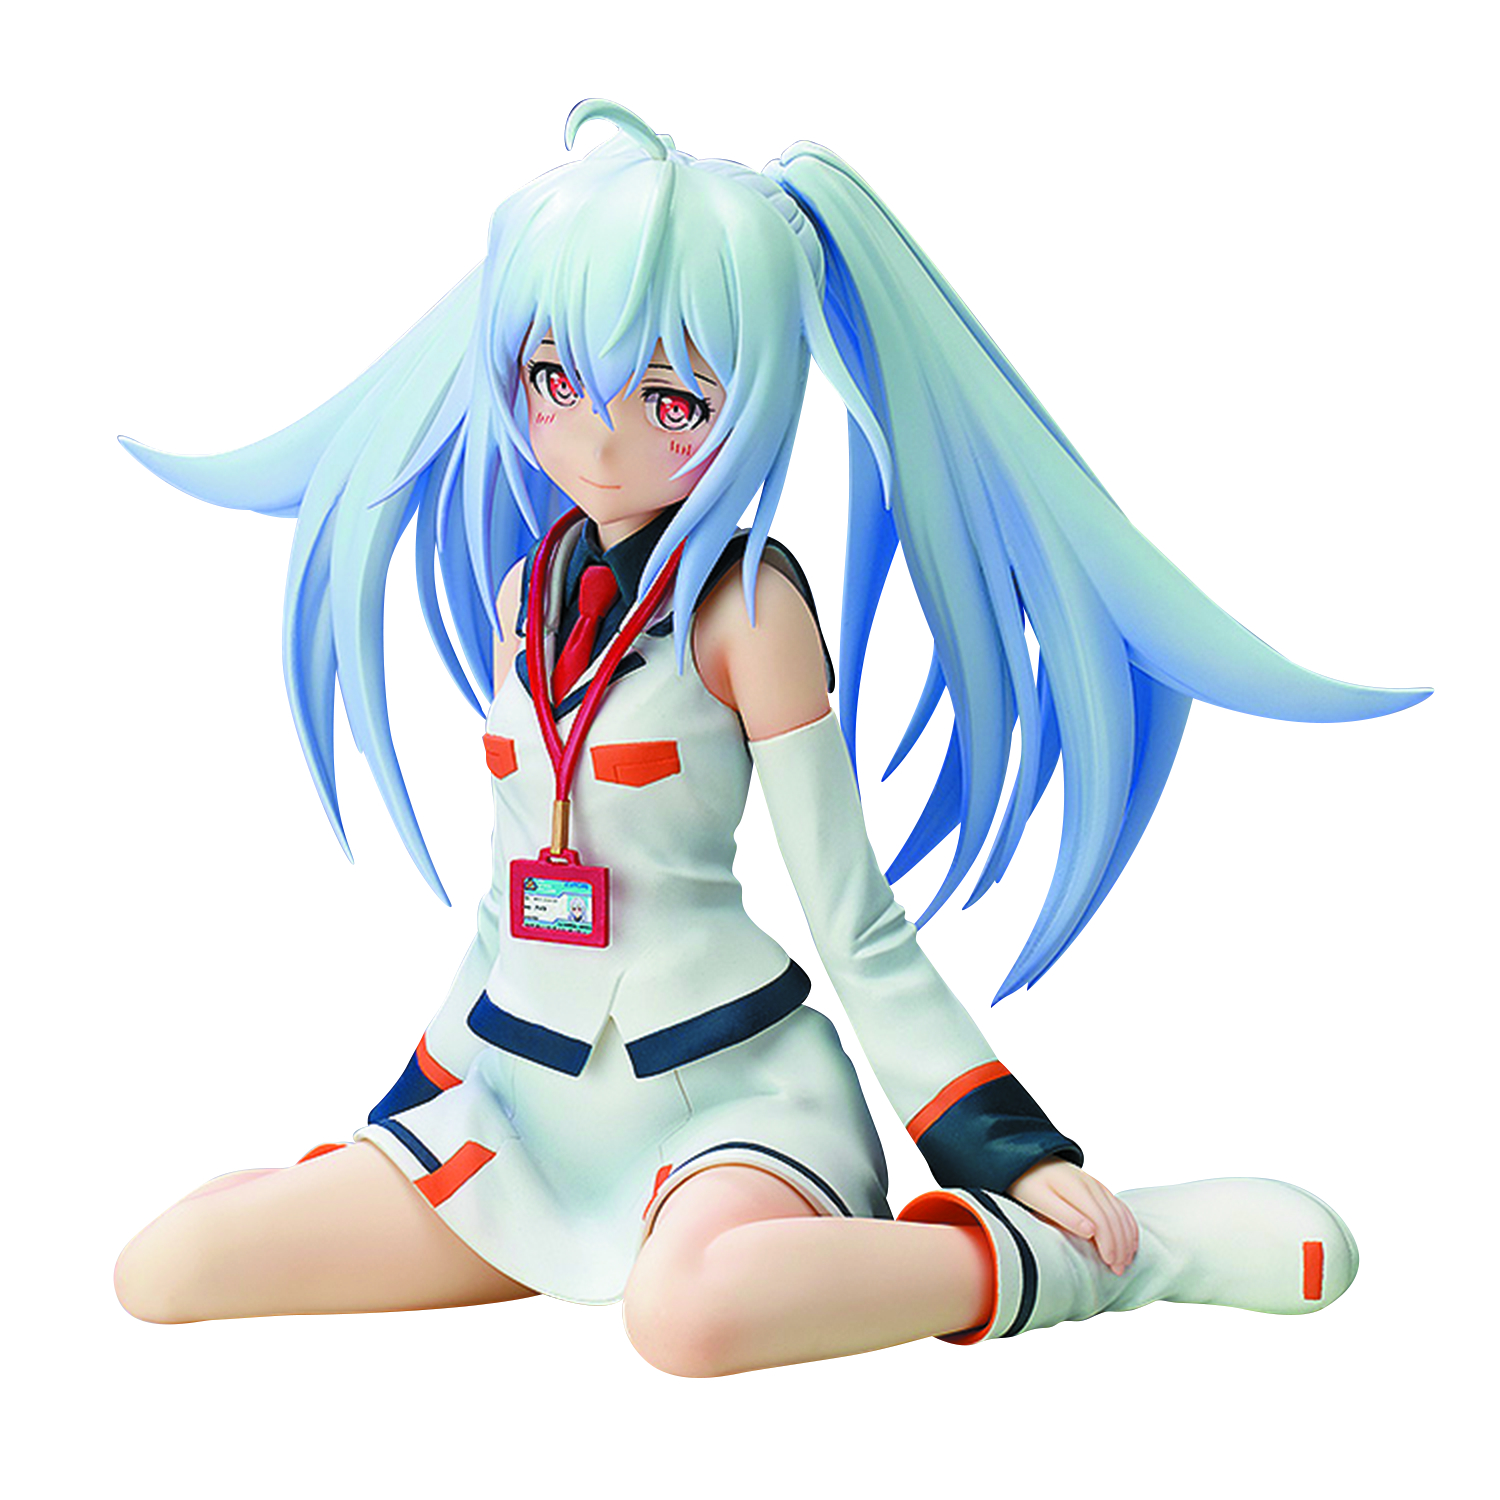 From the sci-fi anime series set in the near future Plastic Memories comes ...